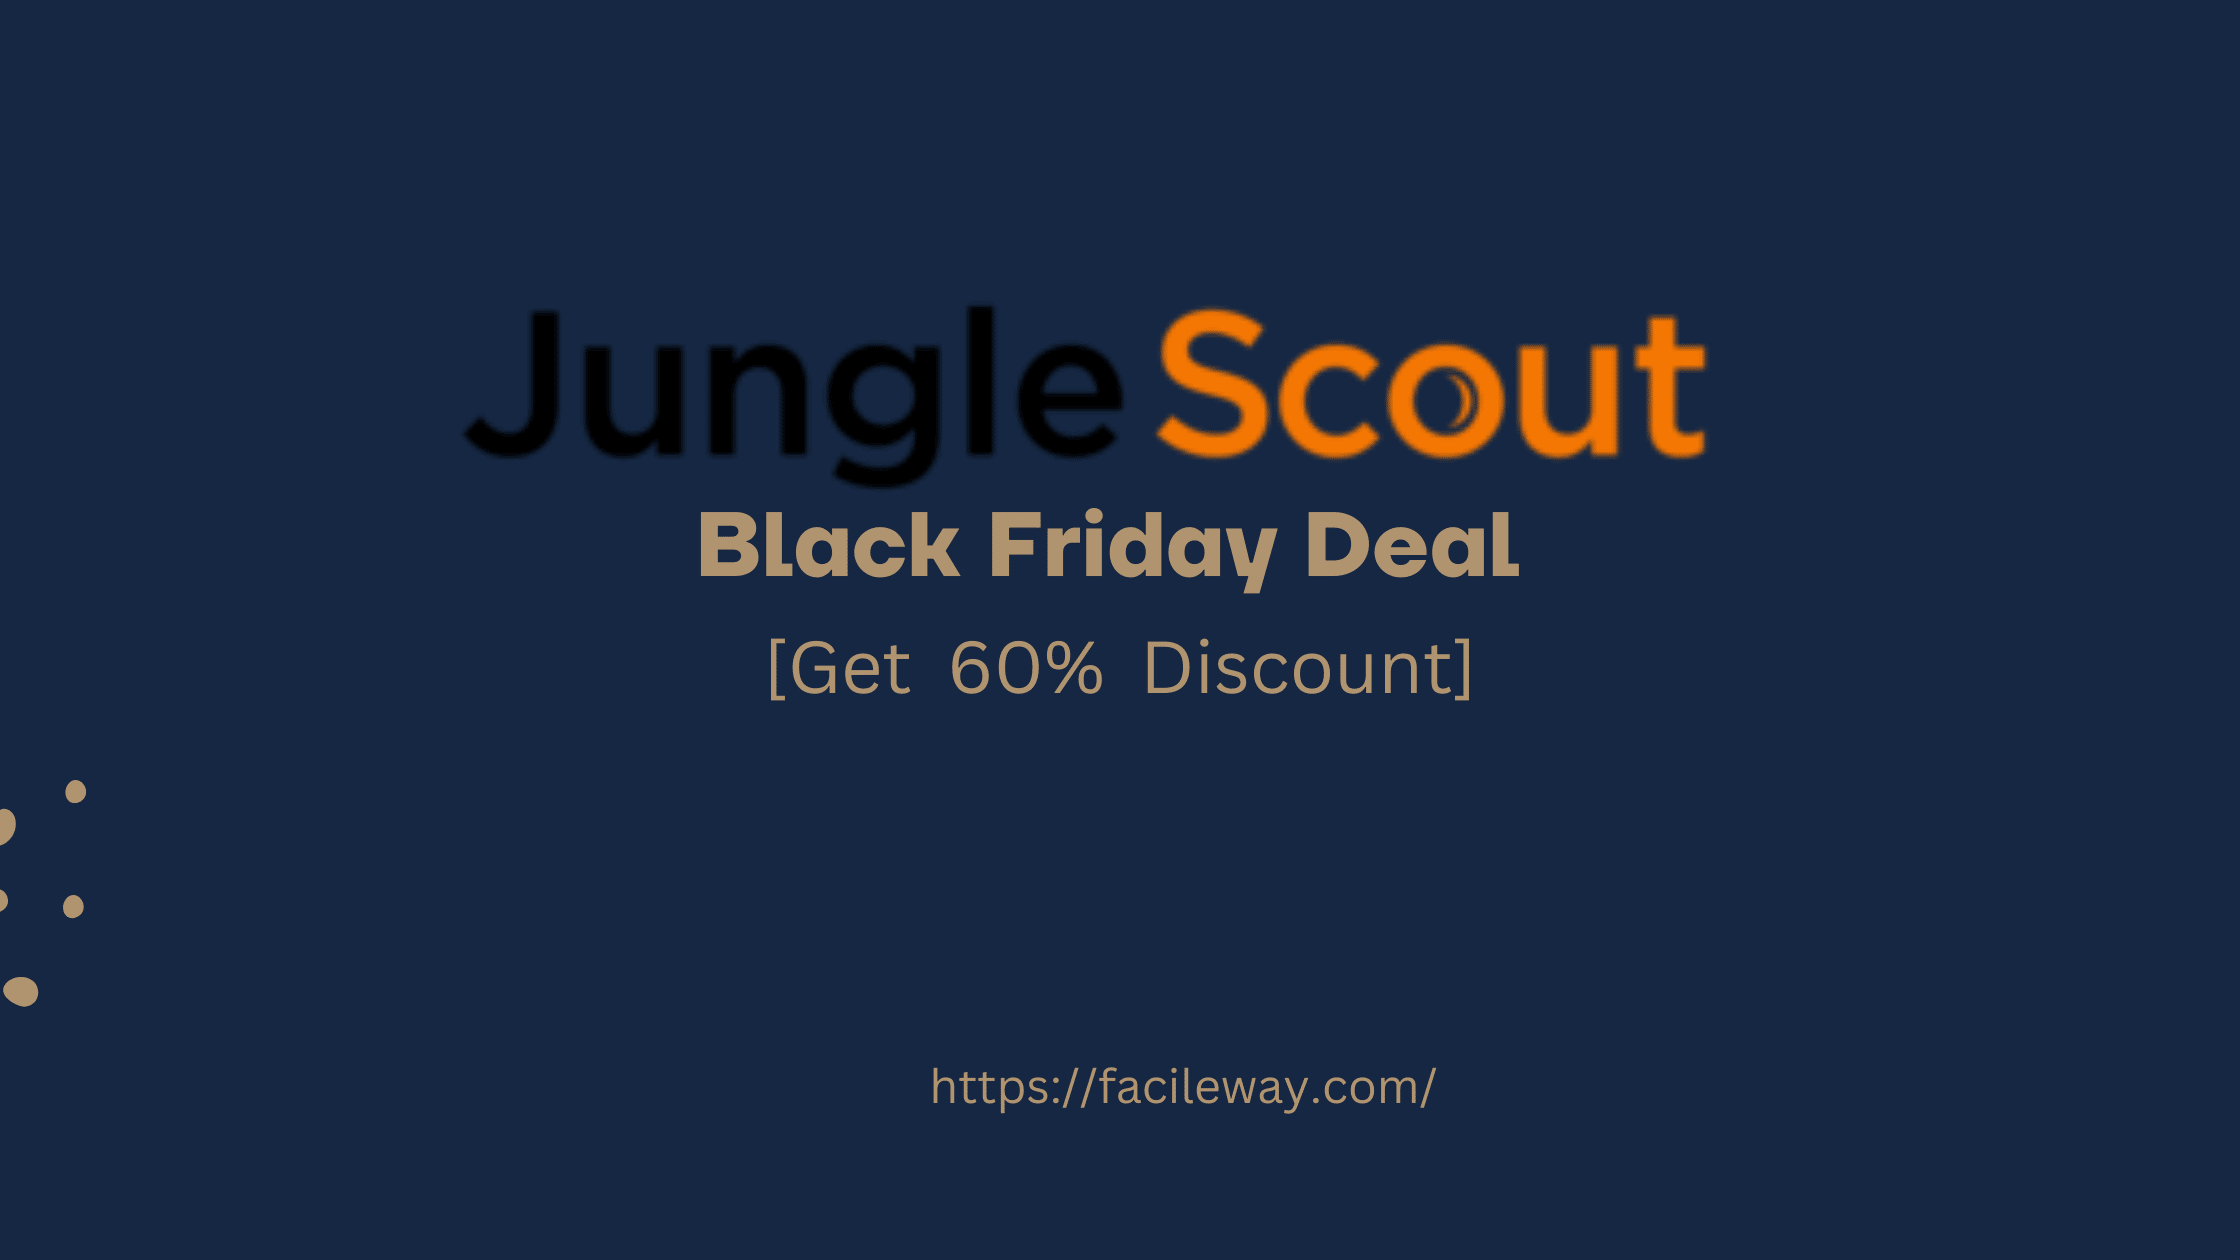 Jungle Scout Black Friday Deal